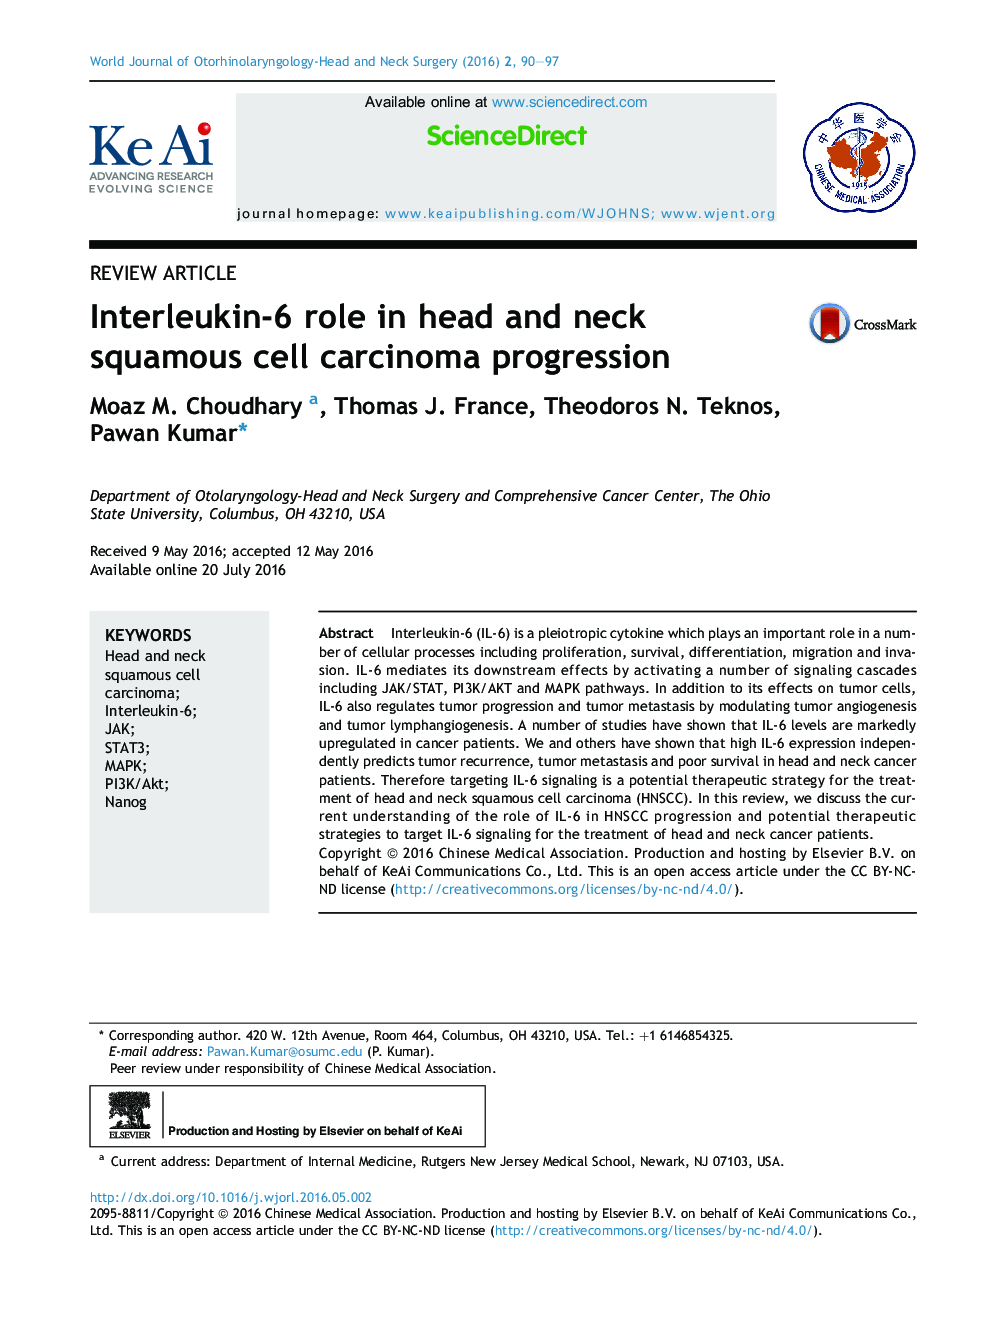 Interleukin-6 role in head and neck squamous cell carcinoma progression 